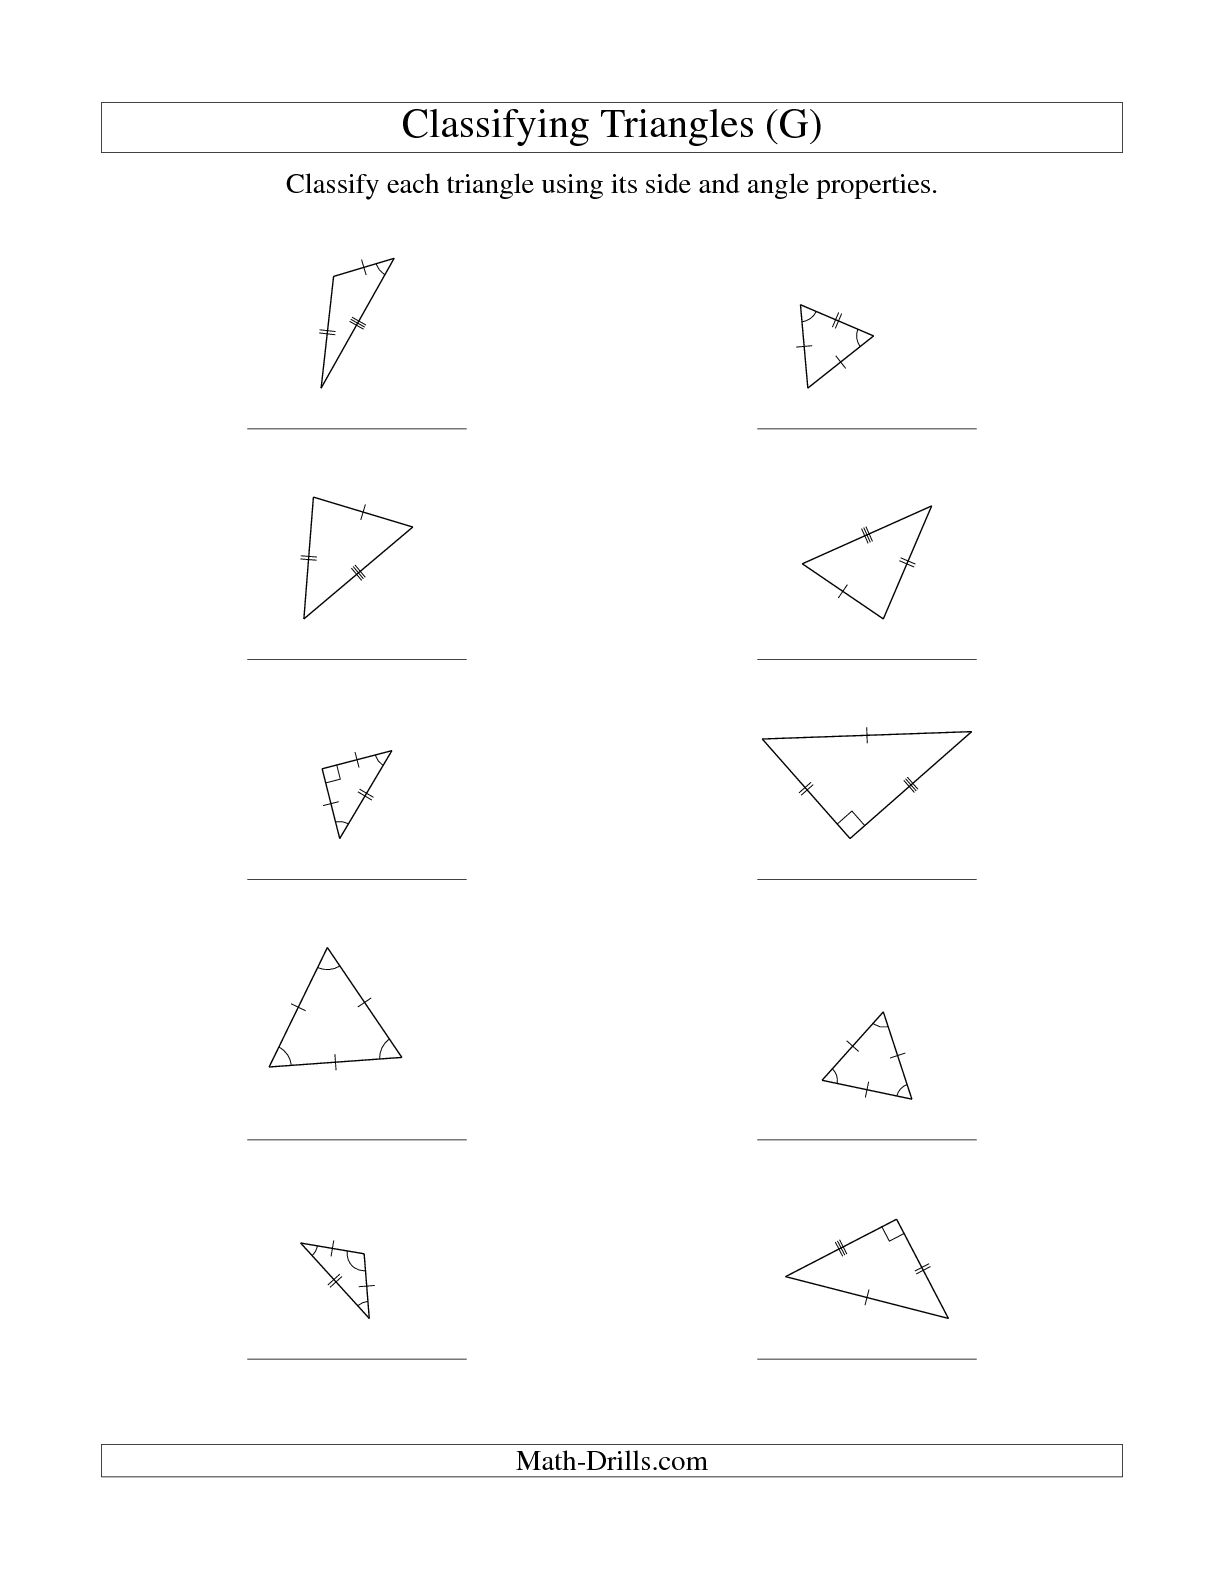 Classifying Triangles by Angles Worksheet Image